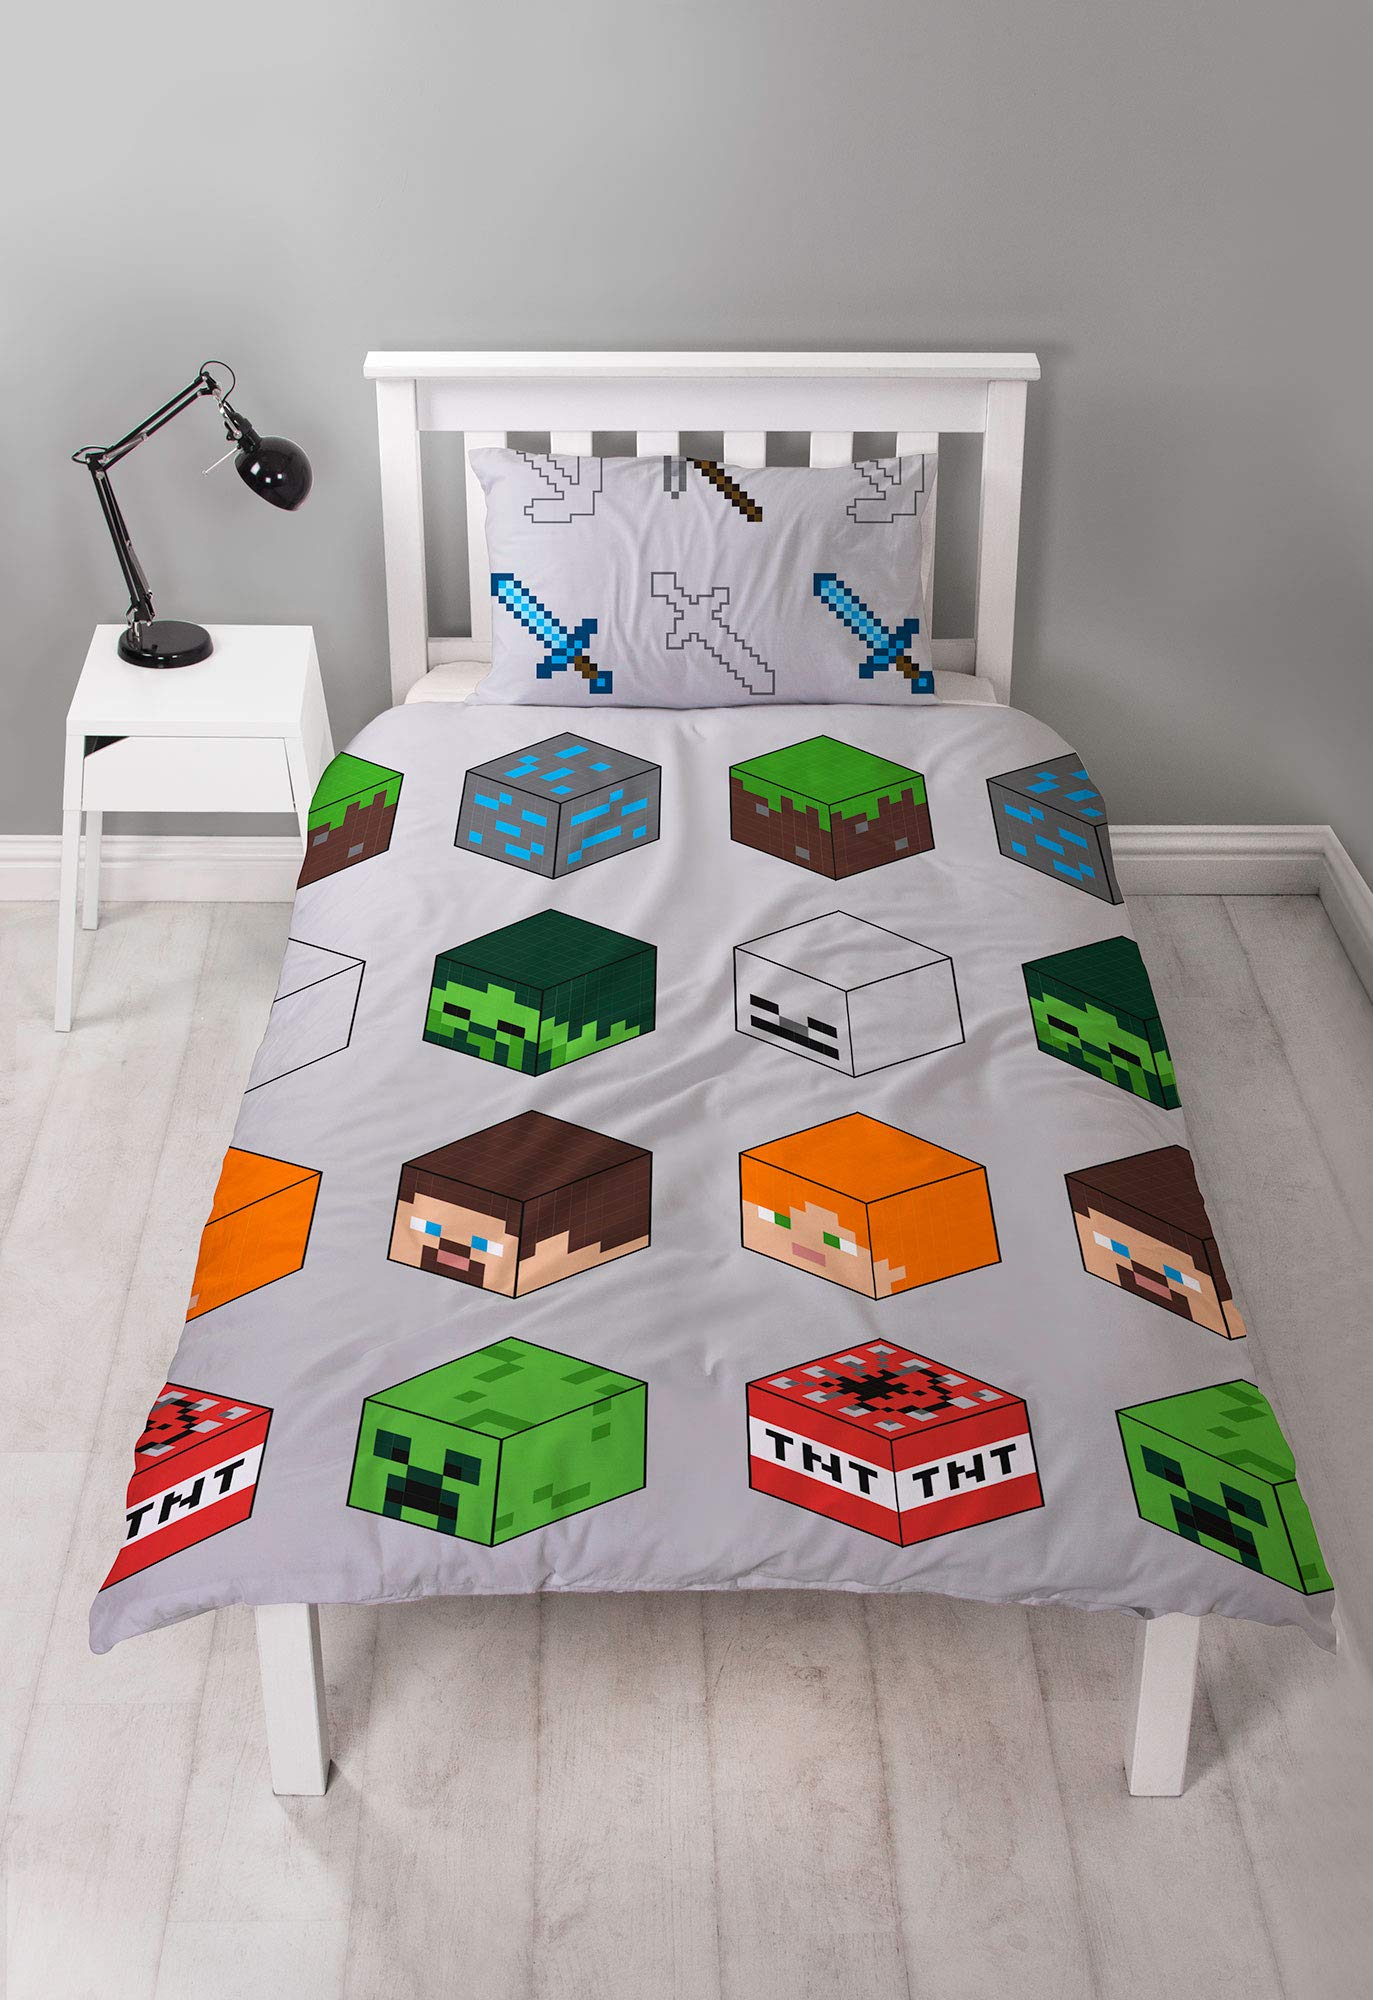 Minecraft Pixel Single Duvet Cover Officially Licensed Reversible Two Sided Creeper & TNT Design with Matching Pillowcase, Polyester, Green